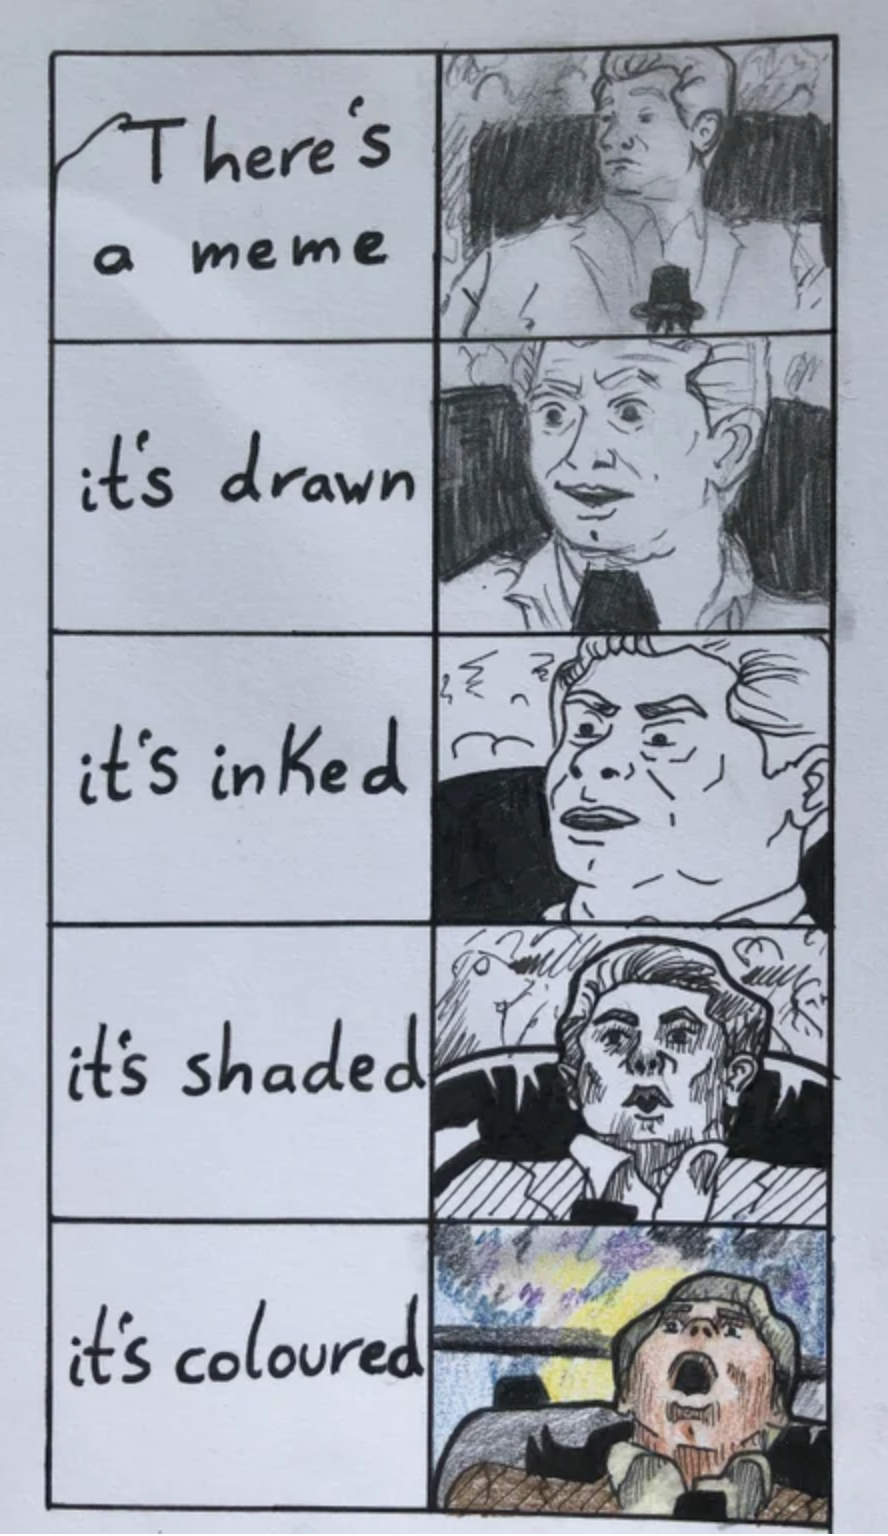 comics - There's meme it's drawn it's inked lit's shaded Lit's coloured